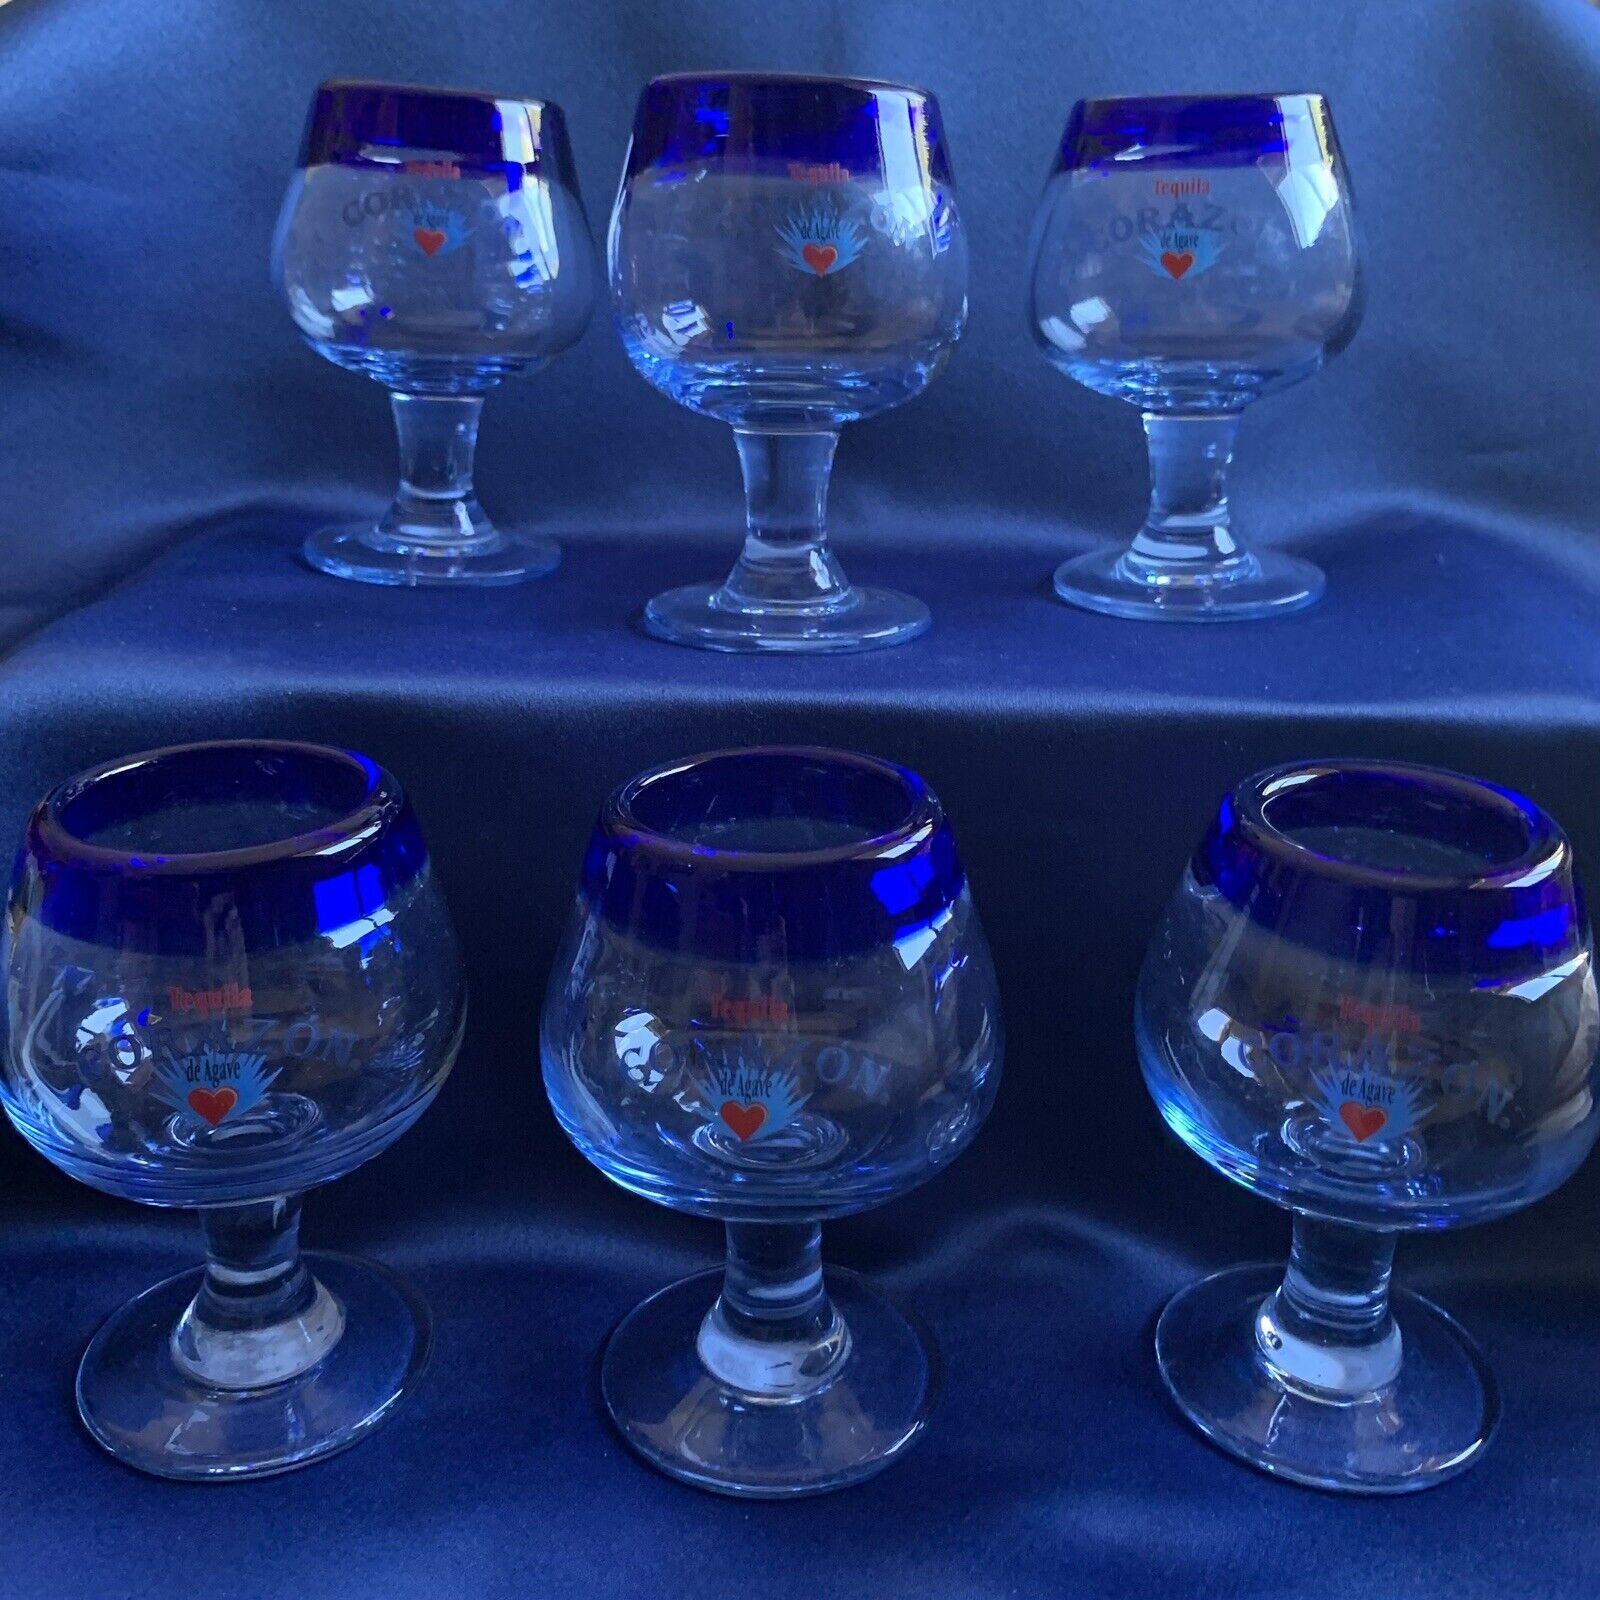 Vintage Tequila Corazon Handcrafted Shot Glasses Sippers Set of 6 Cinco De Mayo